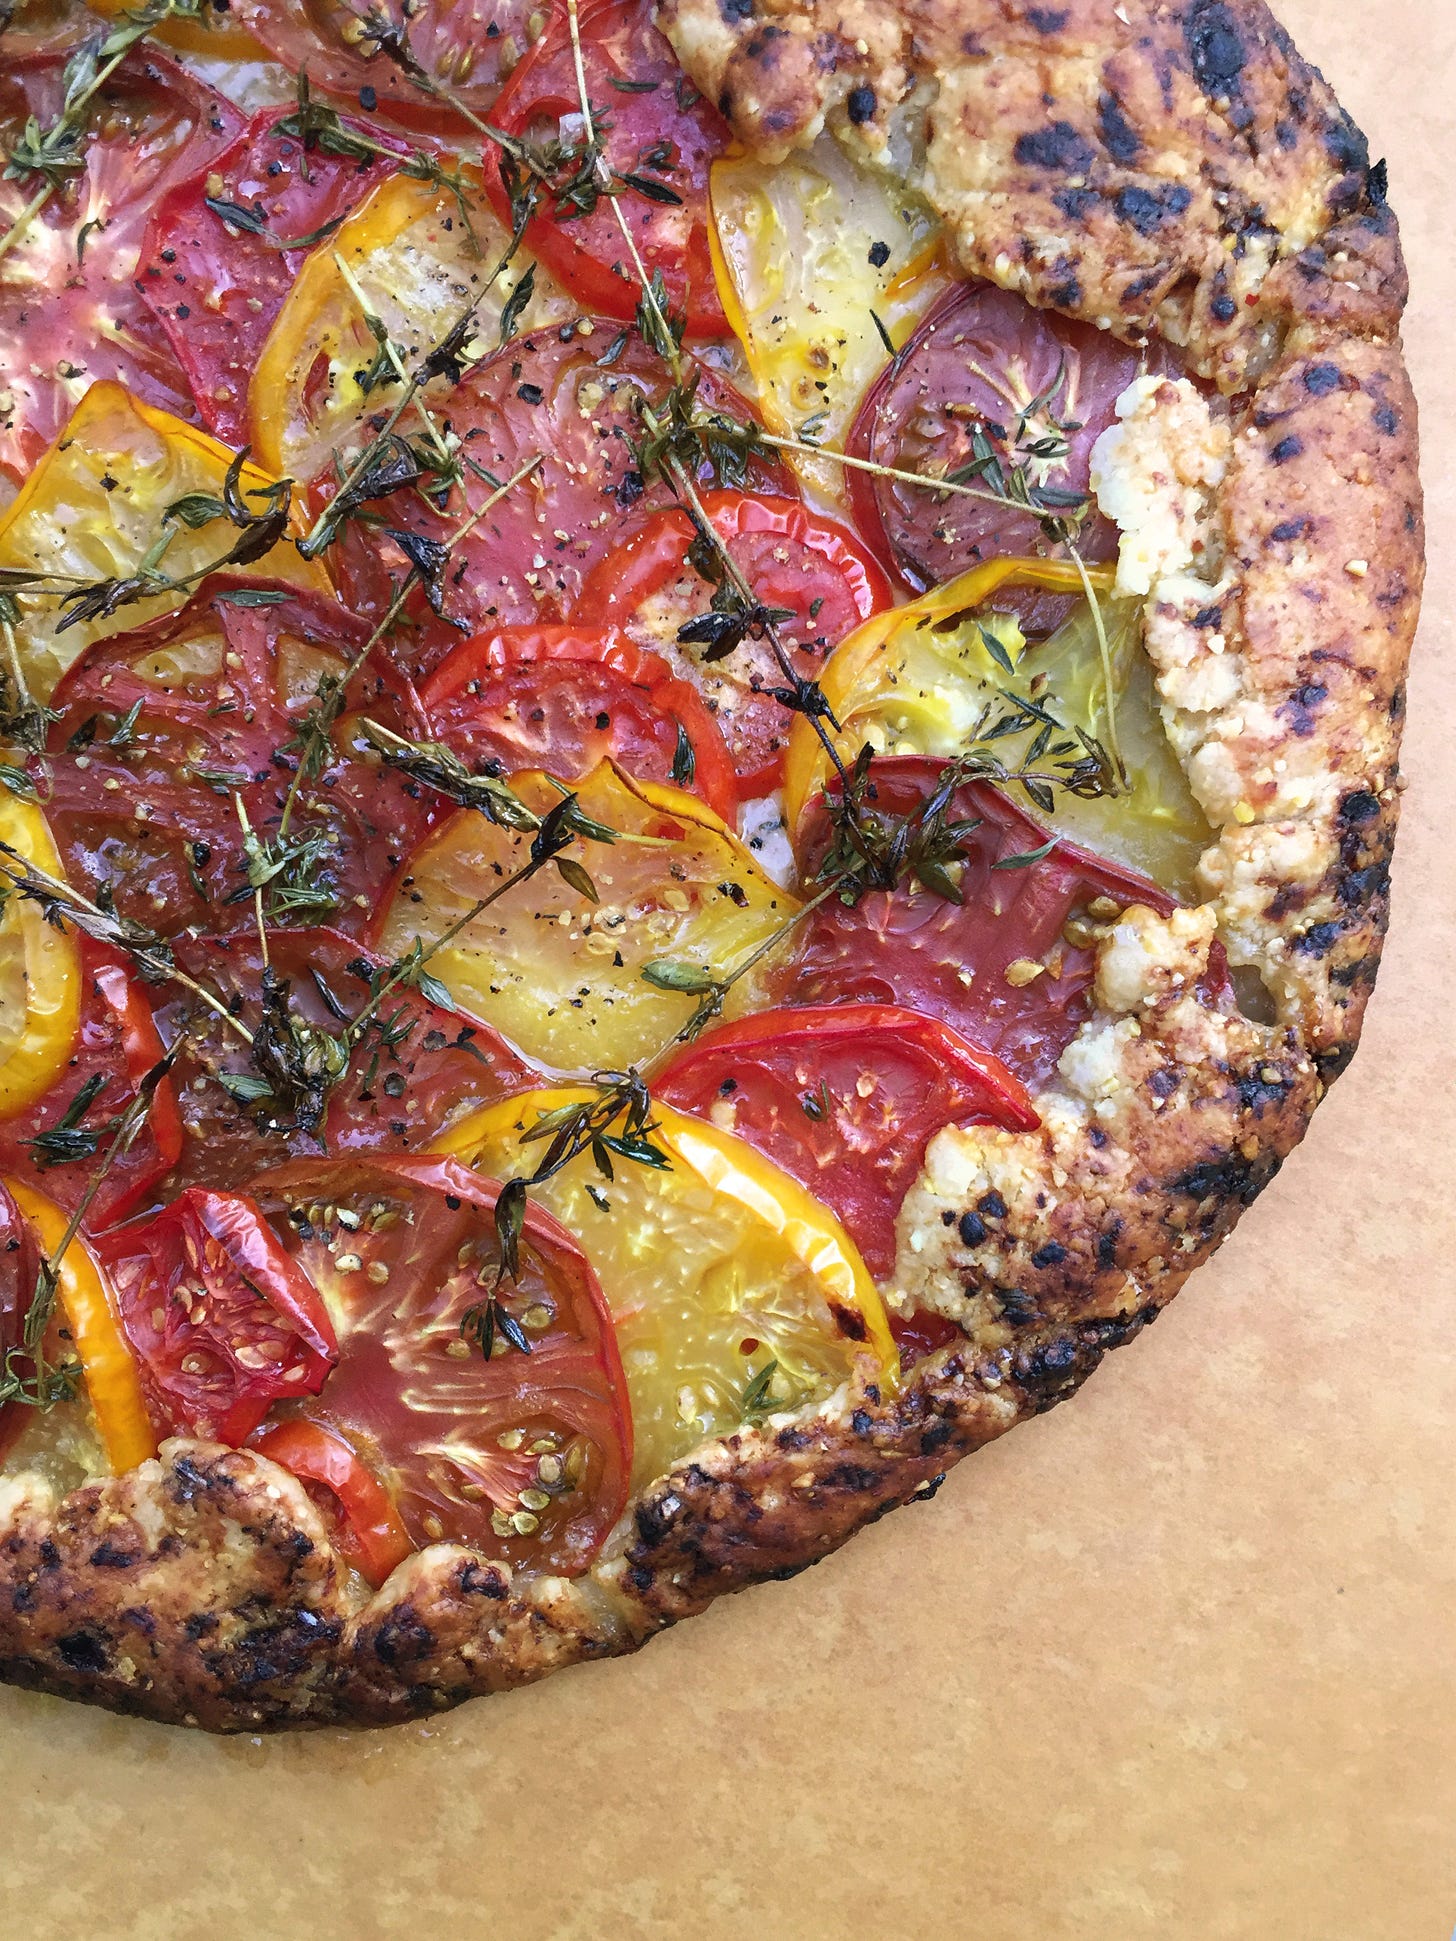 in a pastry crust with browned edges, three colours of heirloom tomato slices overlap each other. On top are several caramelized sprigs of thyme, and a dusting of black pepper.